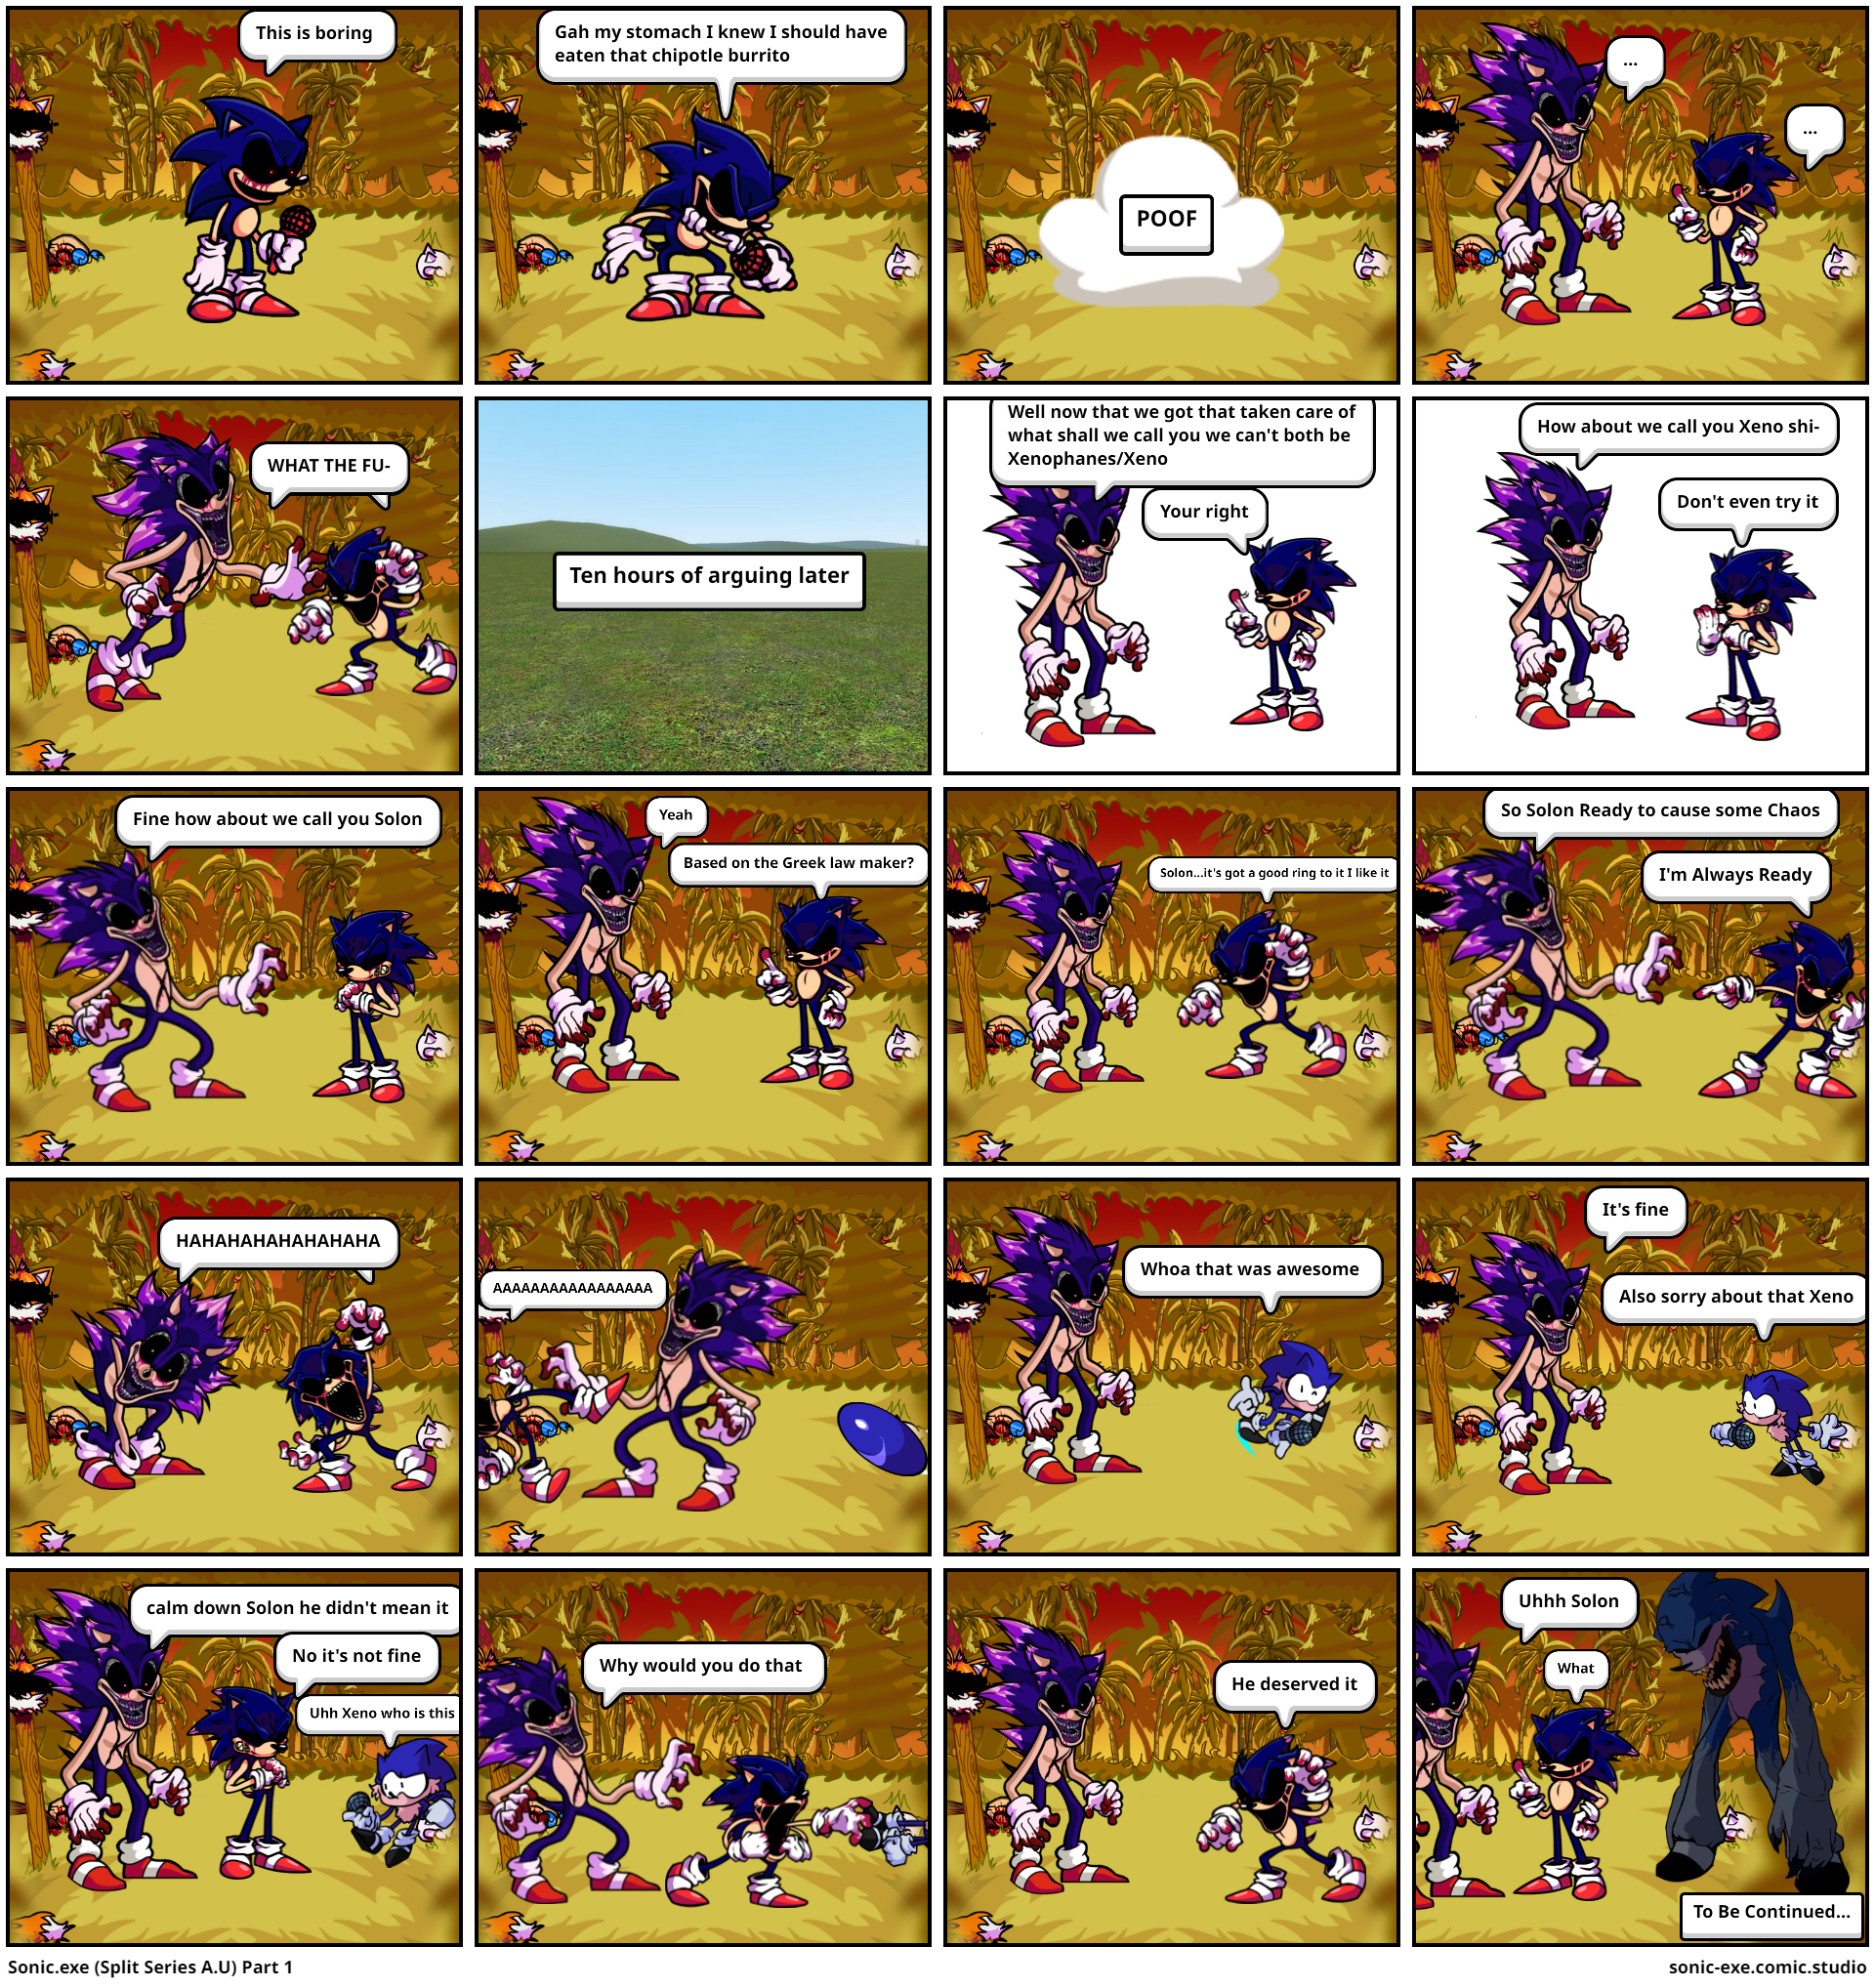 Sonic.exe (Commentary)